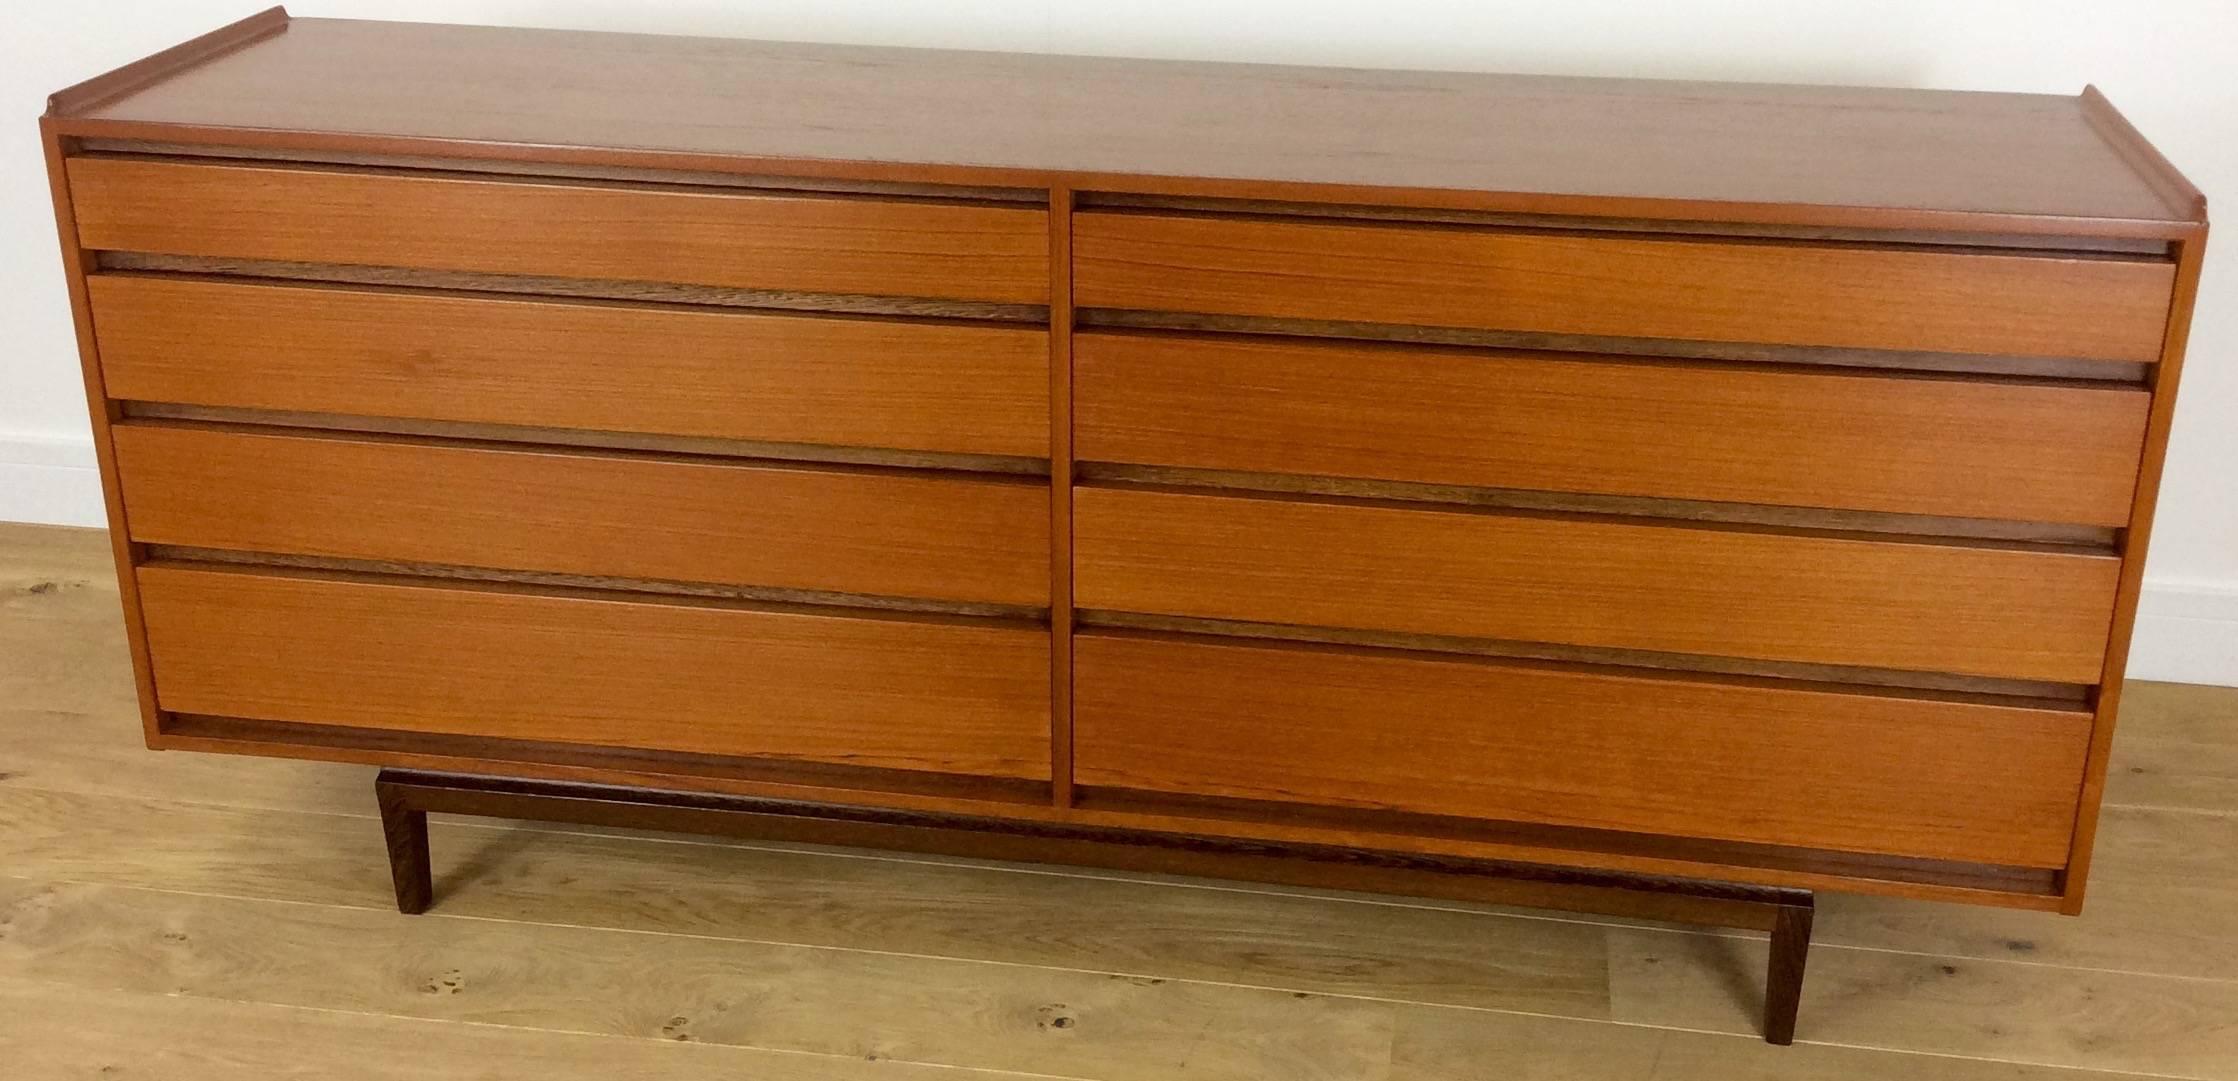 Mid-Century Modern design chest of drawers.
A beautifully crafted mid-20th century design chest of drawers, finished in fine teak and royal ebony.
Designed By IB Kofod Larsen for FM Fredericia.
Measures: 79.5-80 cm H, 169 cm W, 45 cm D.
Danish,